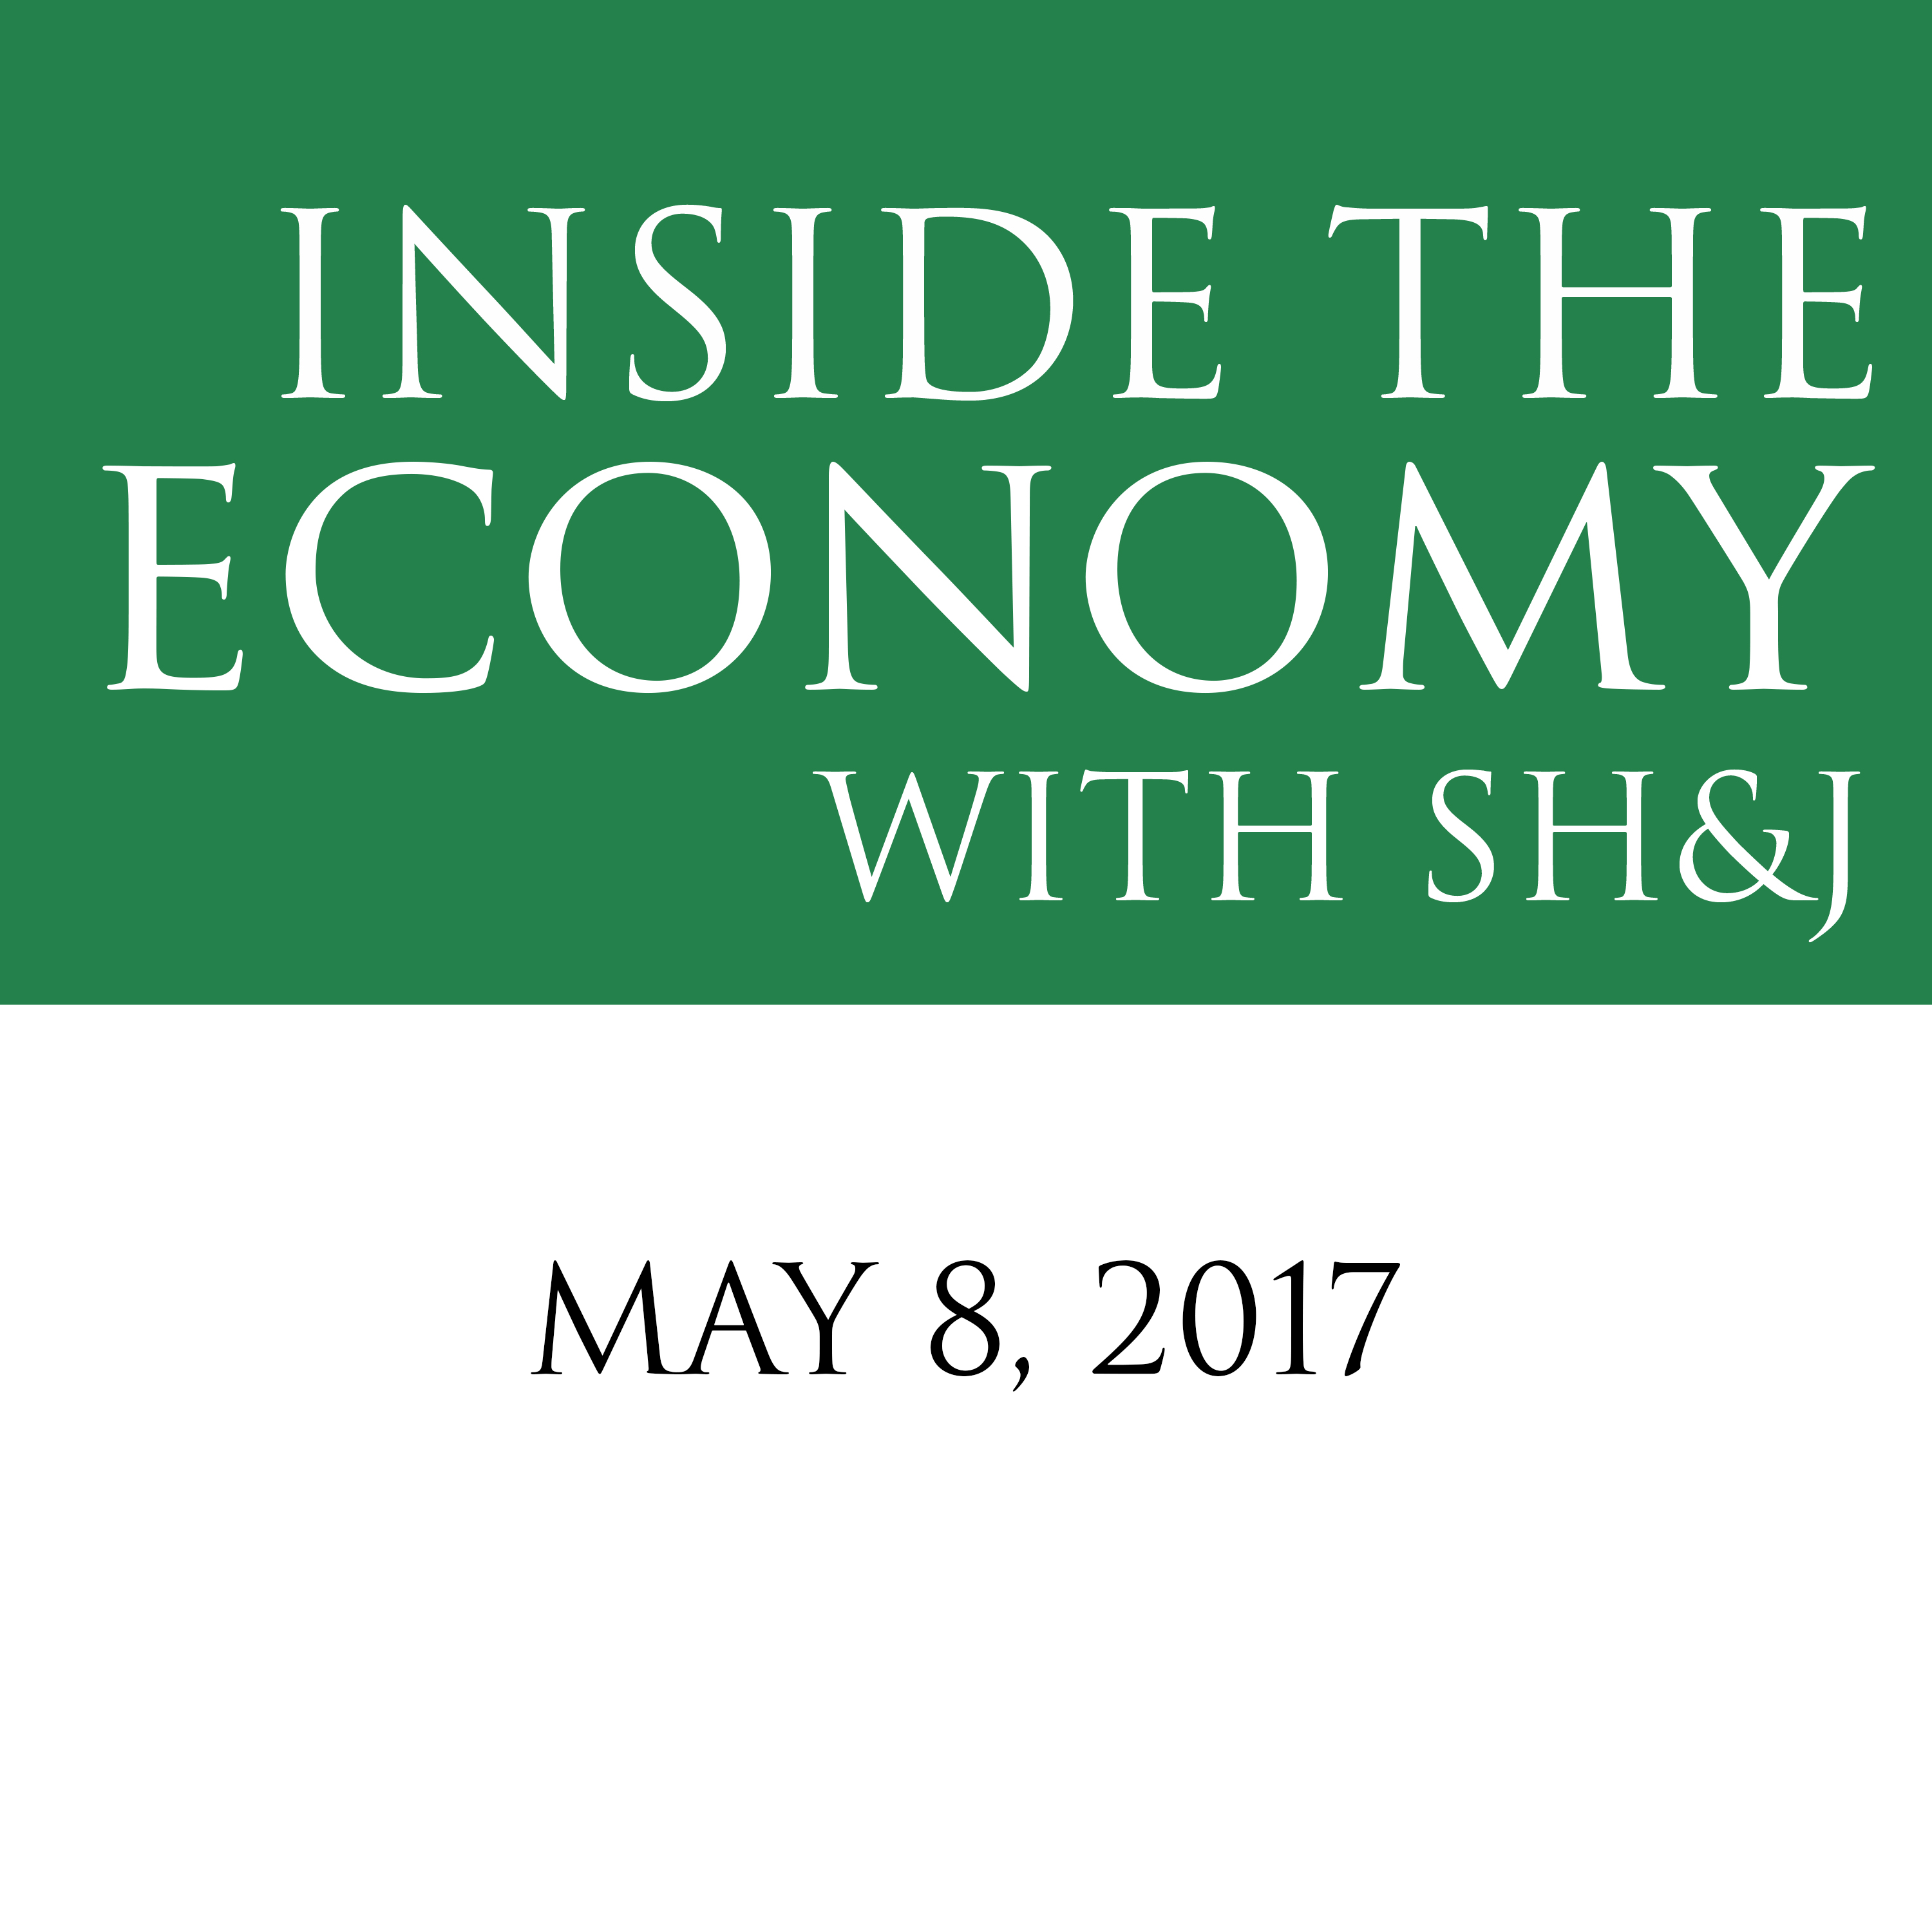 May 8, 2017  --  Inside the Economy with SH&J